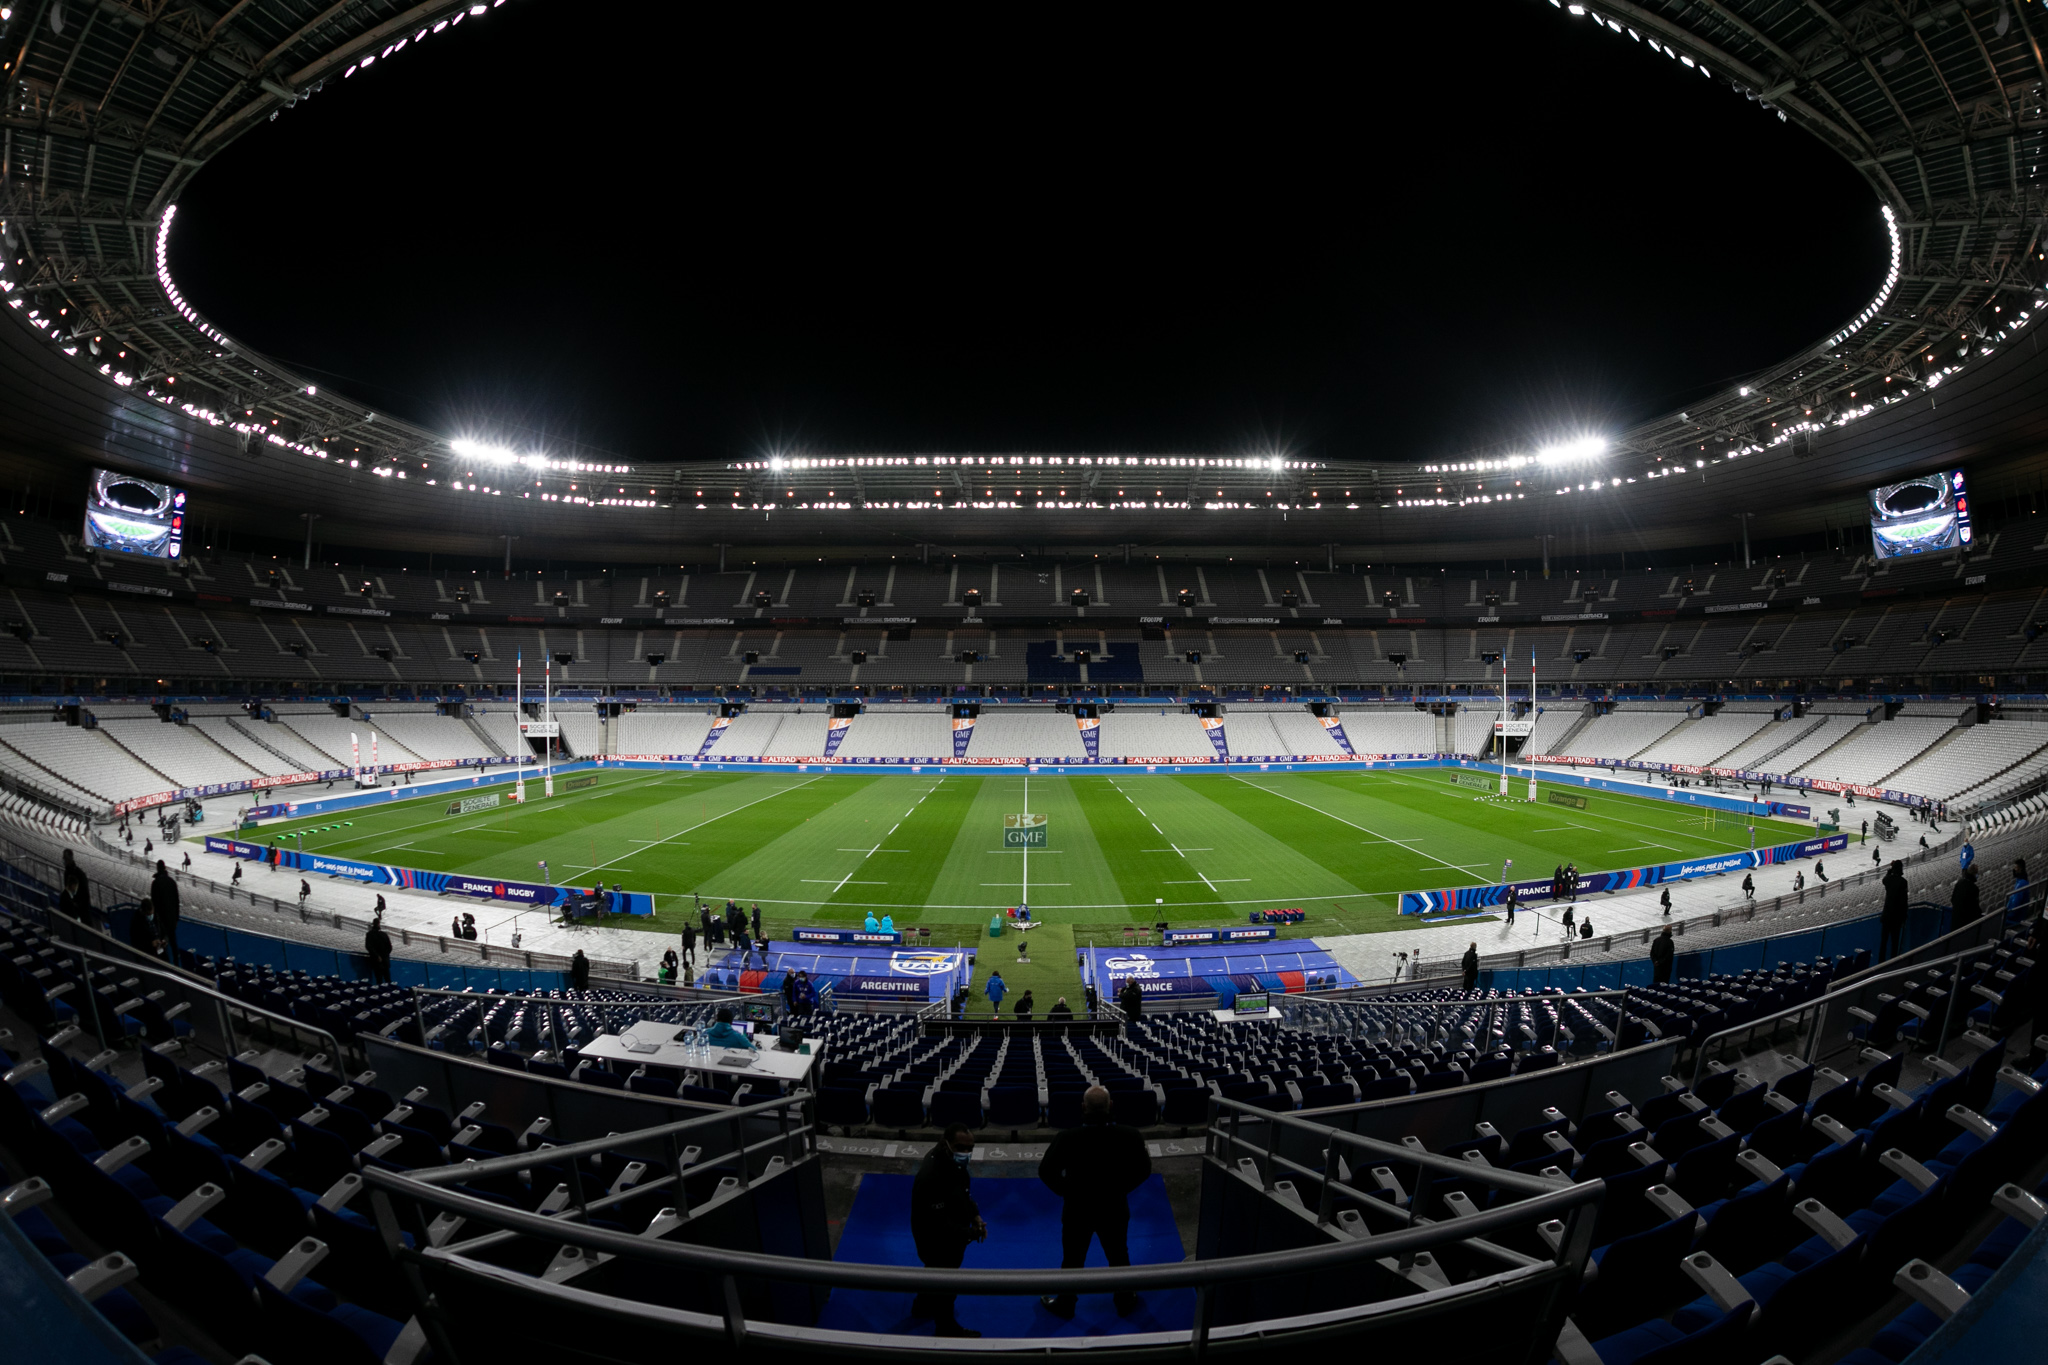 The Stade de France will be the venue for rugby in Paris 2024